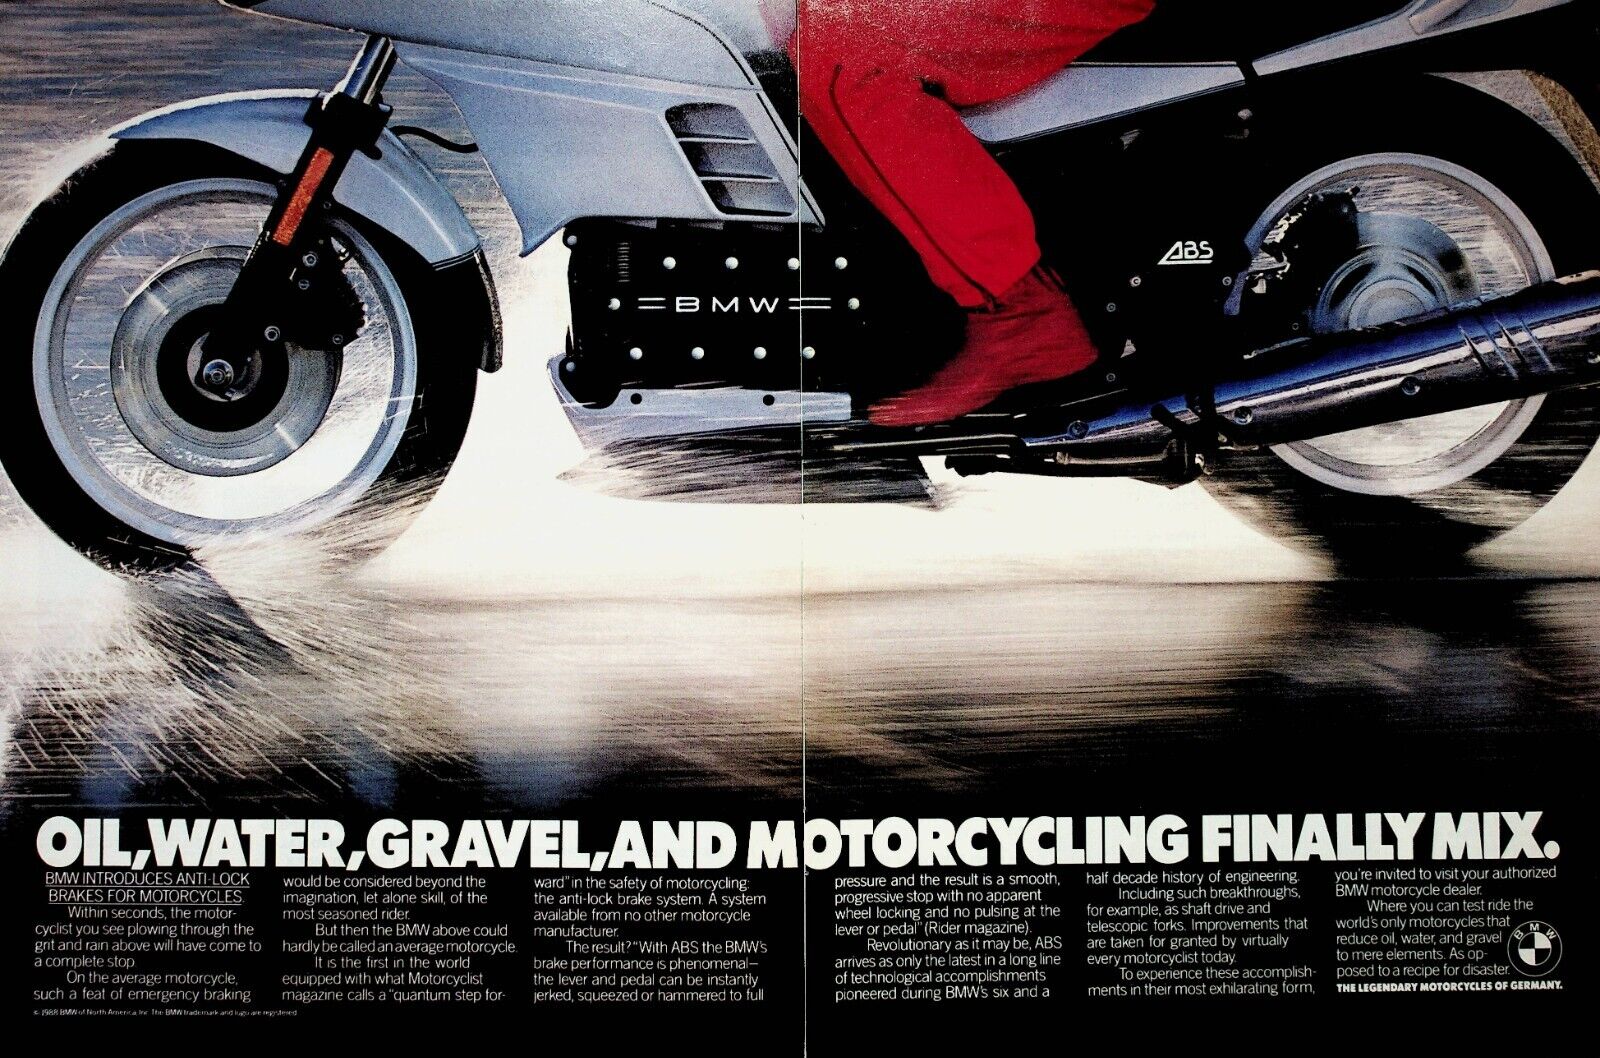 1989 BMW Anti-Lock Brakes for Motorcycles - 2-Page Vintage Motorcycle Ad